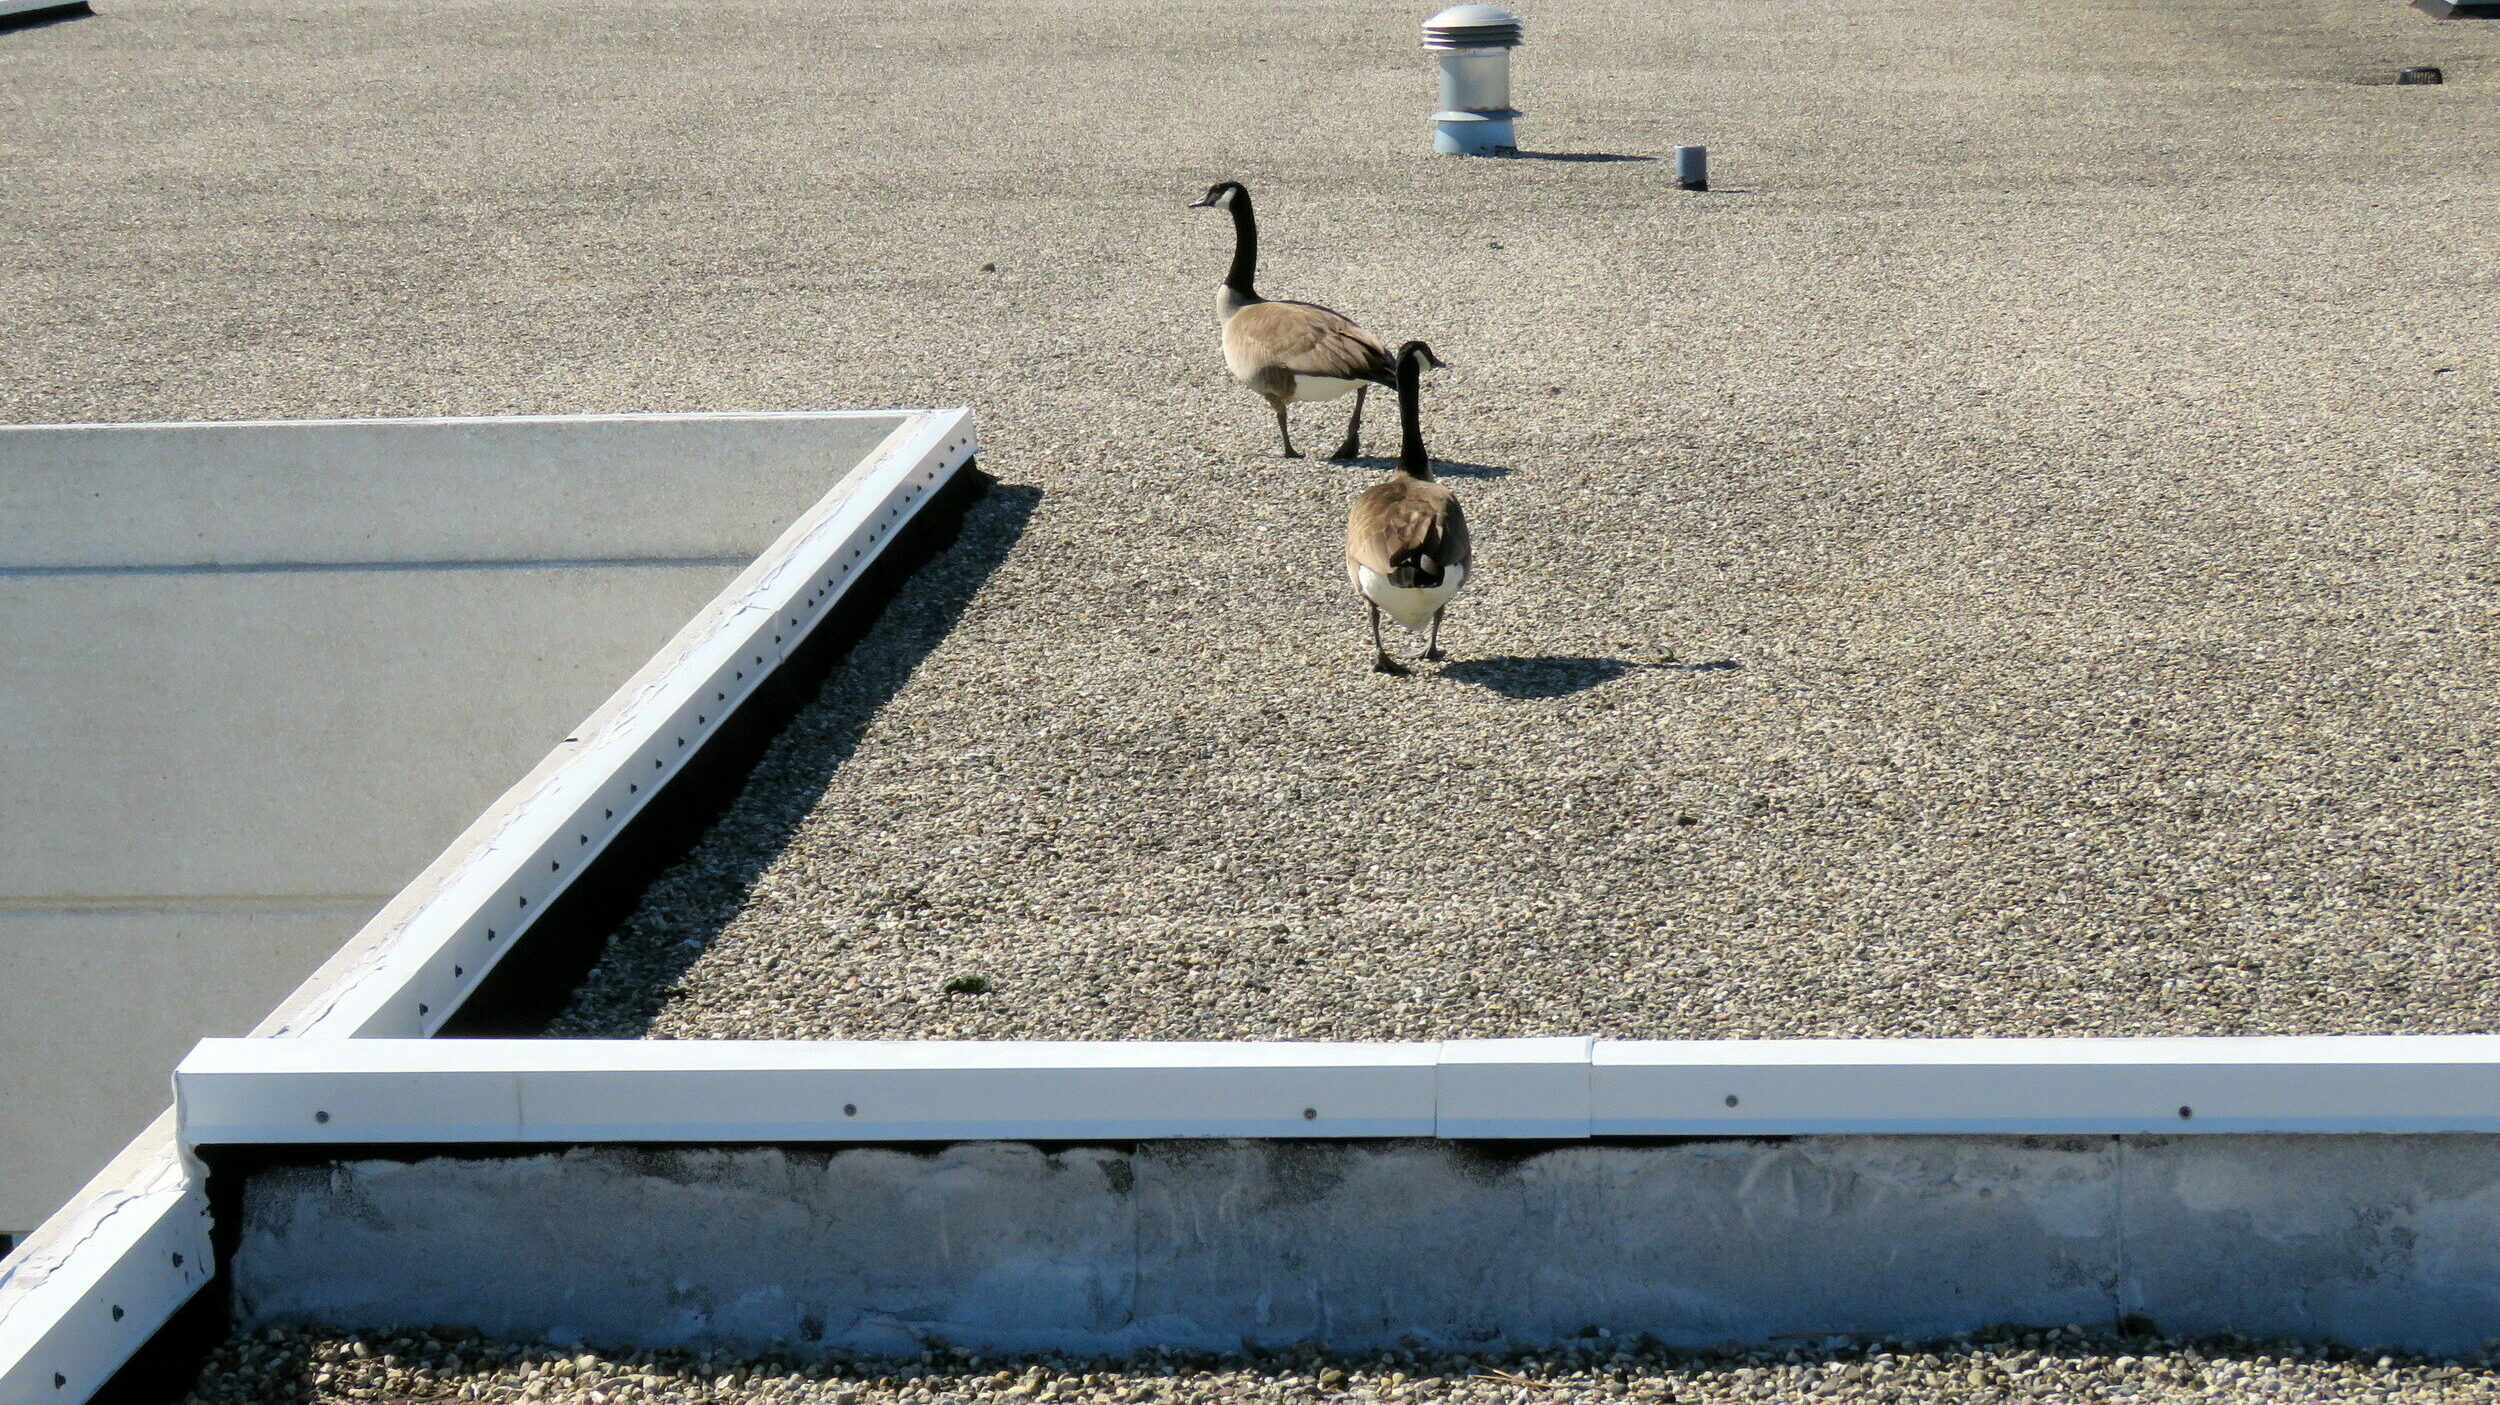 Geese on a flat roof. Bird issues with roofs are often related to the corrosive accumulation of bird droppings.